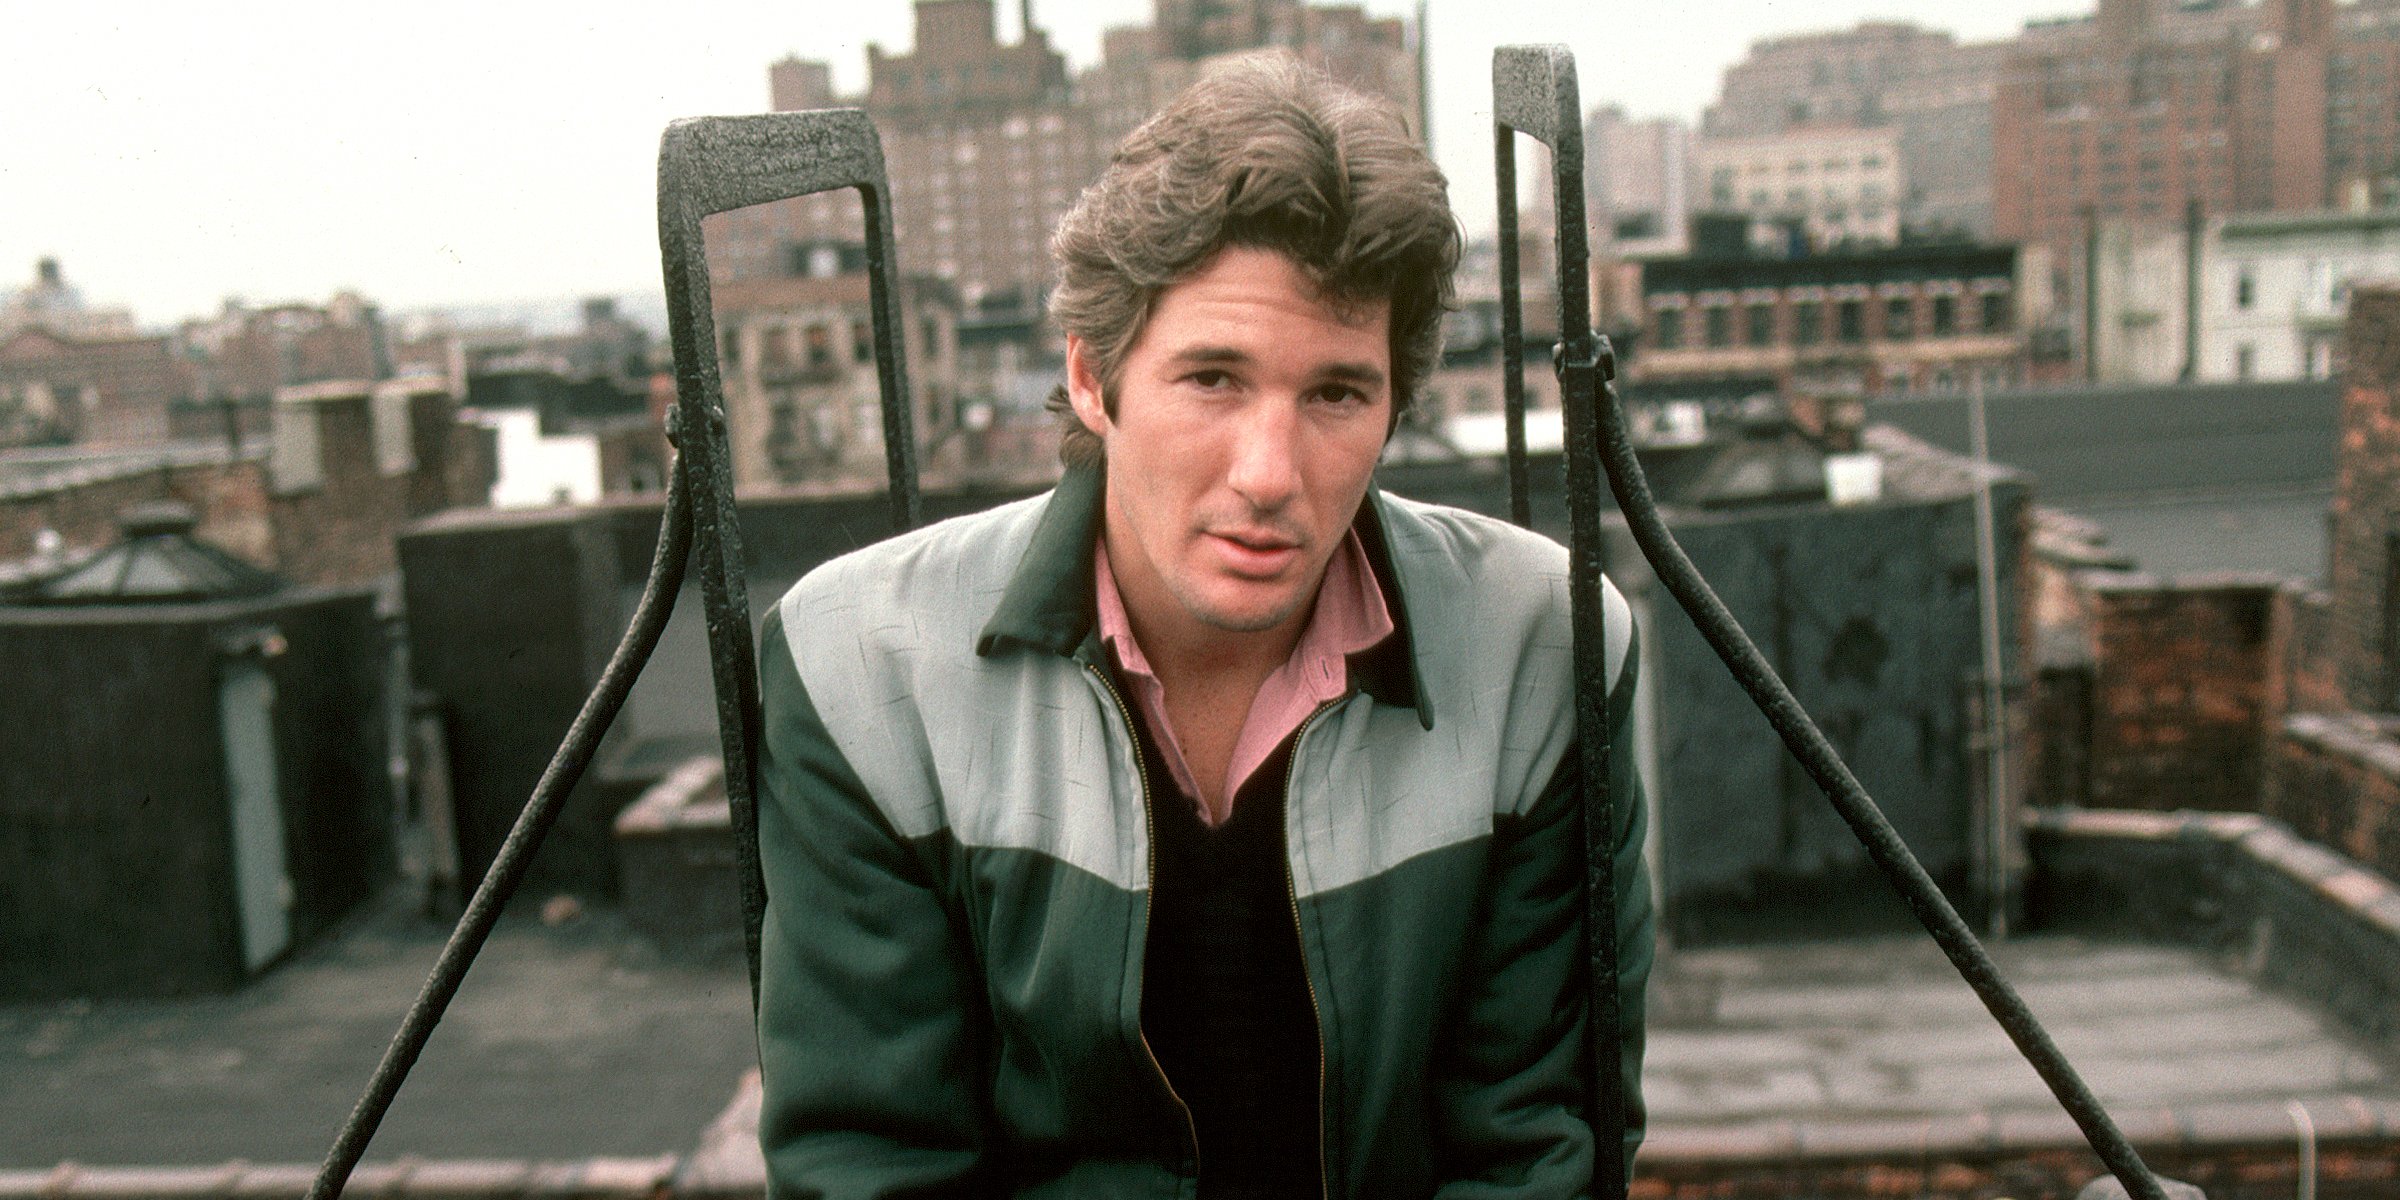 Richard Gere | Foto: Getty Images